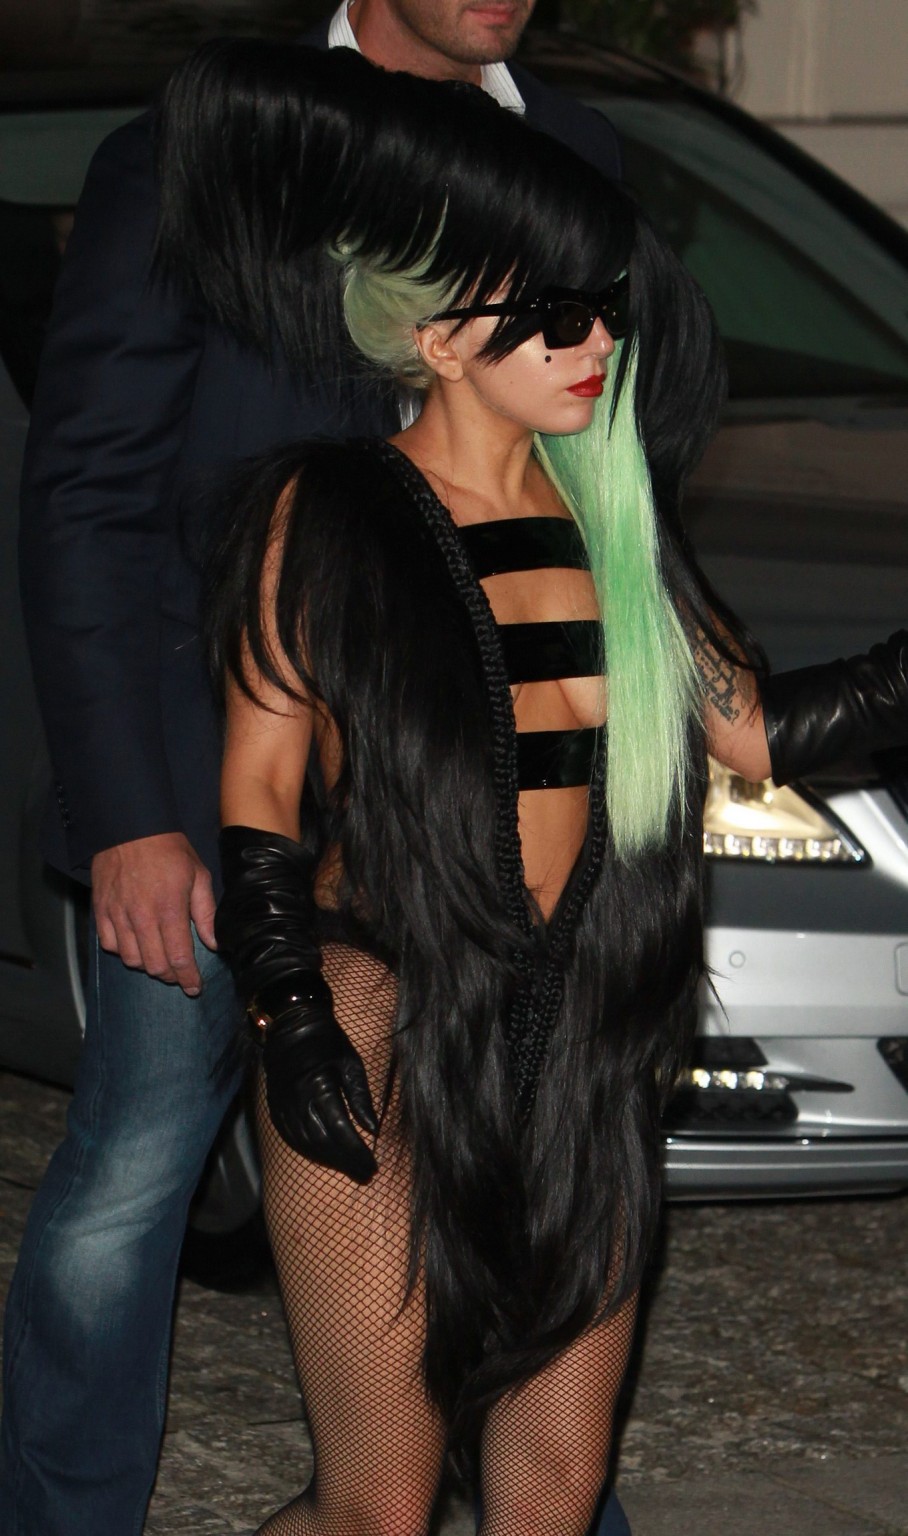 Lady Gaga sighting in London wearing skimpy outfit #75286115